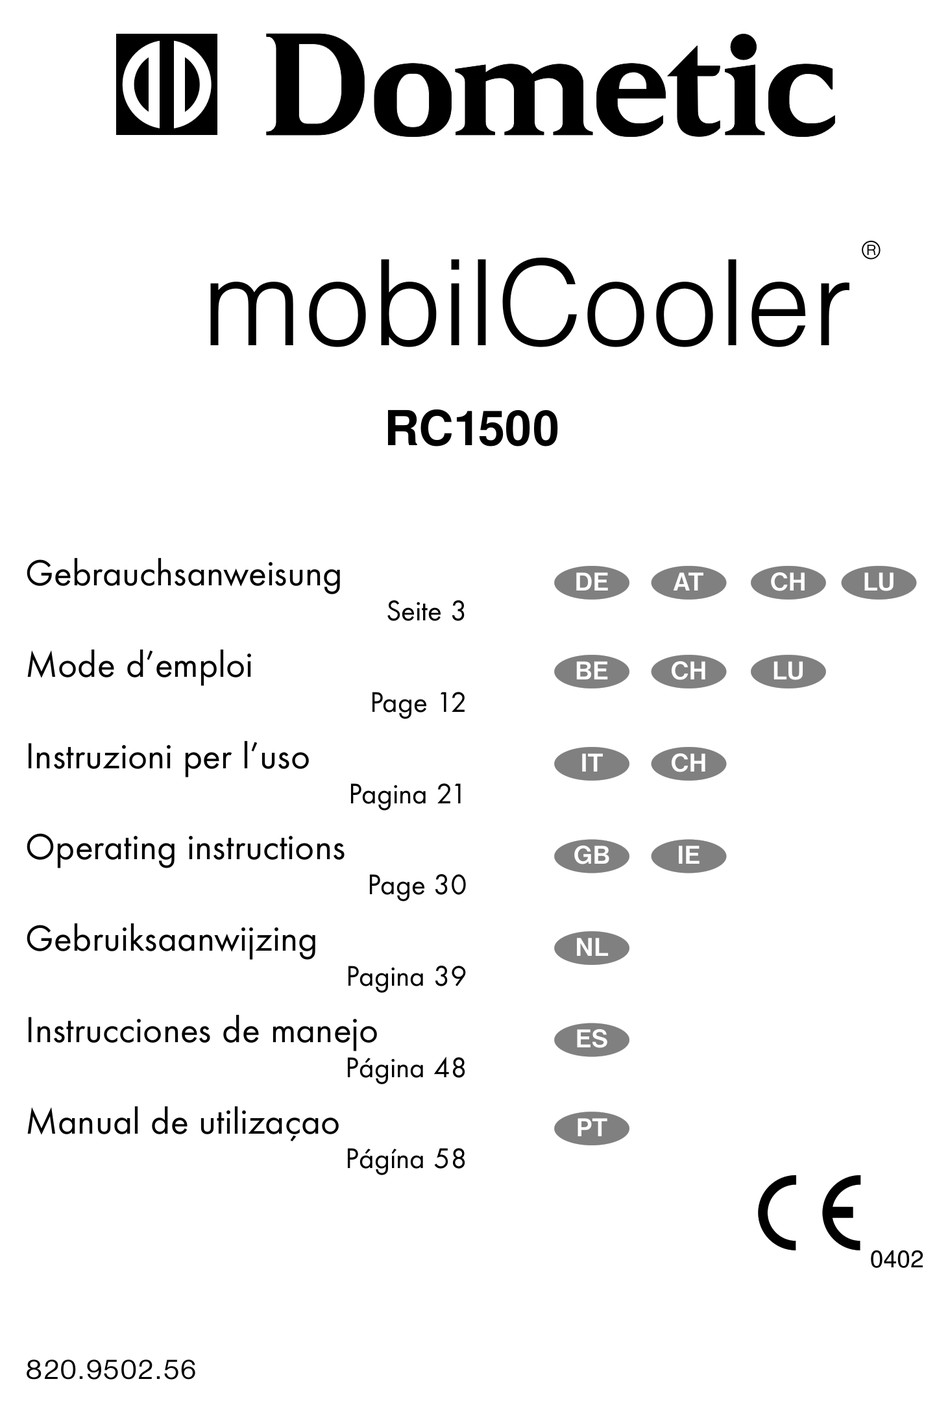 DOMETIC MOBILCOOLER RC1500 OPERATING INSTRUCTIONS MANUAL Pdf Download